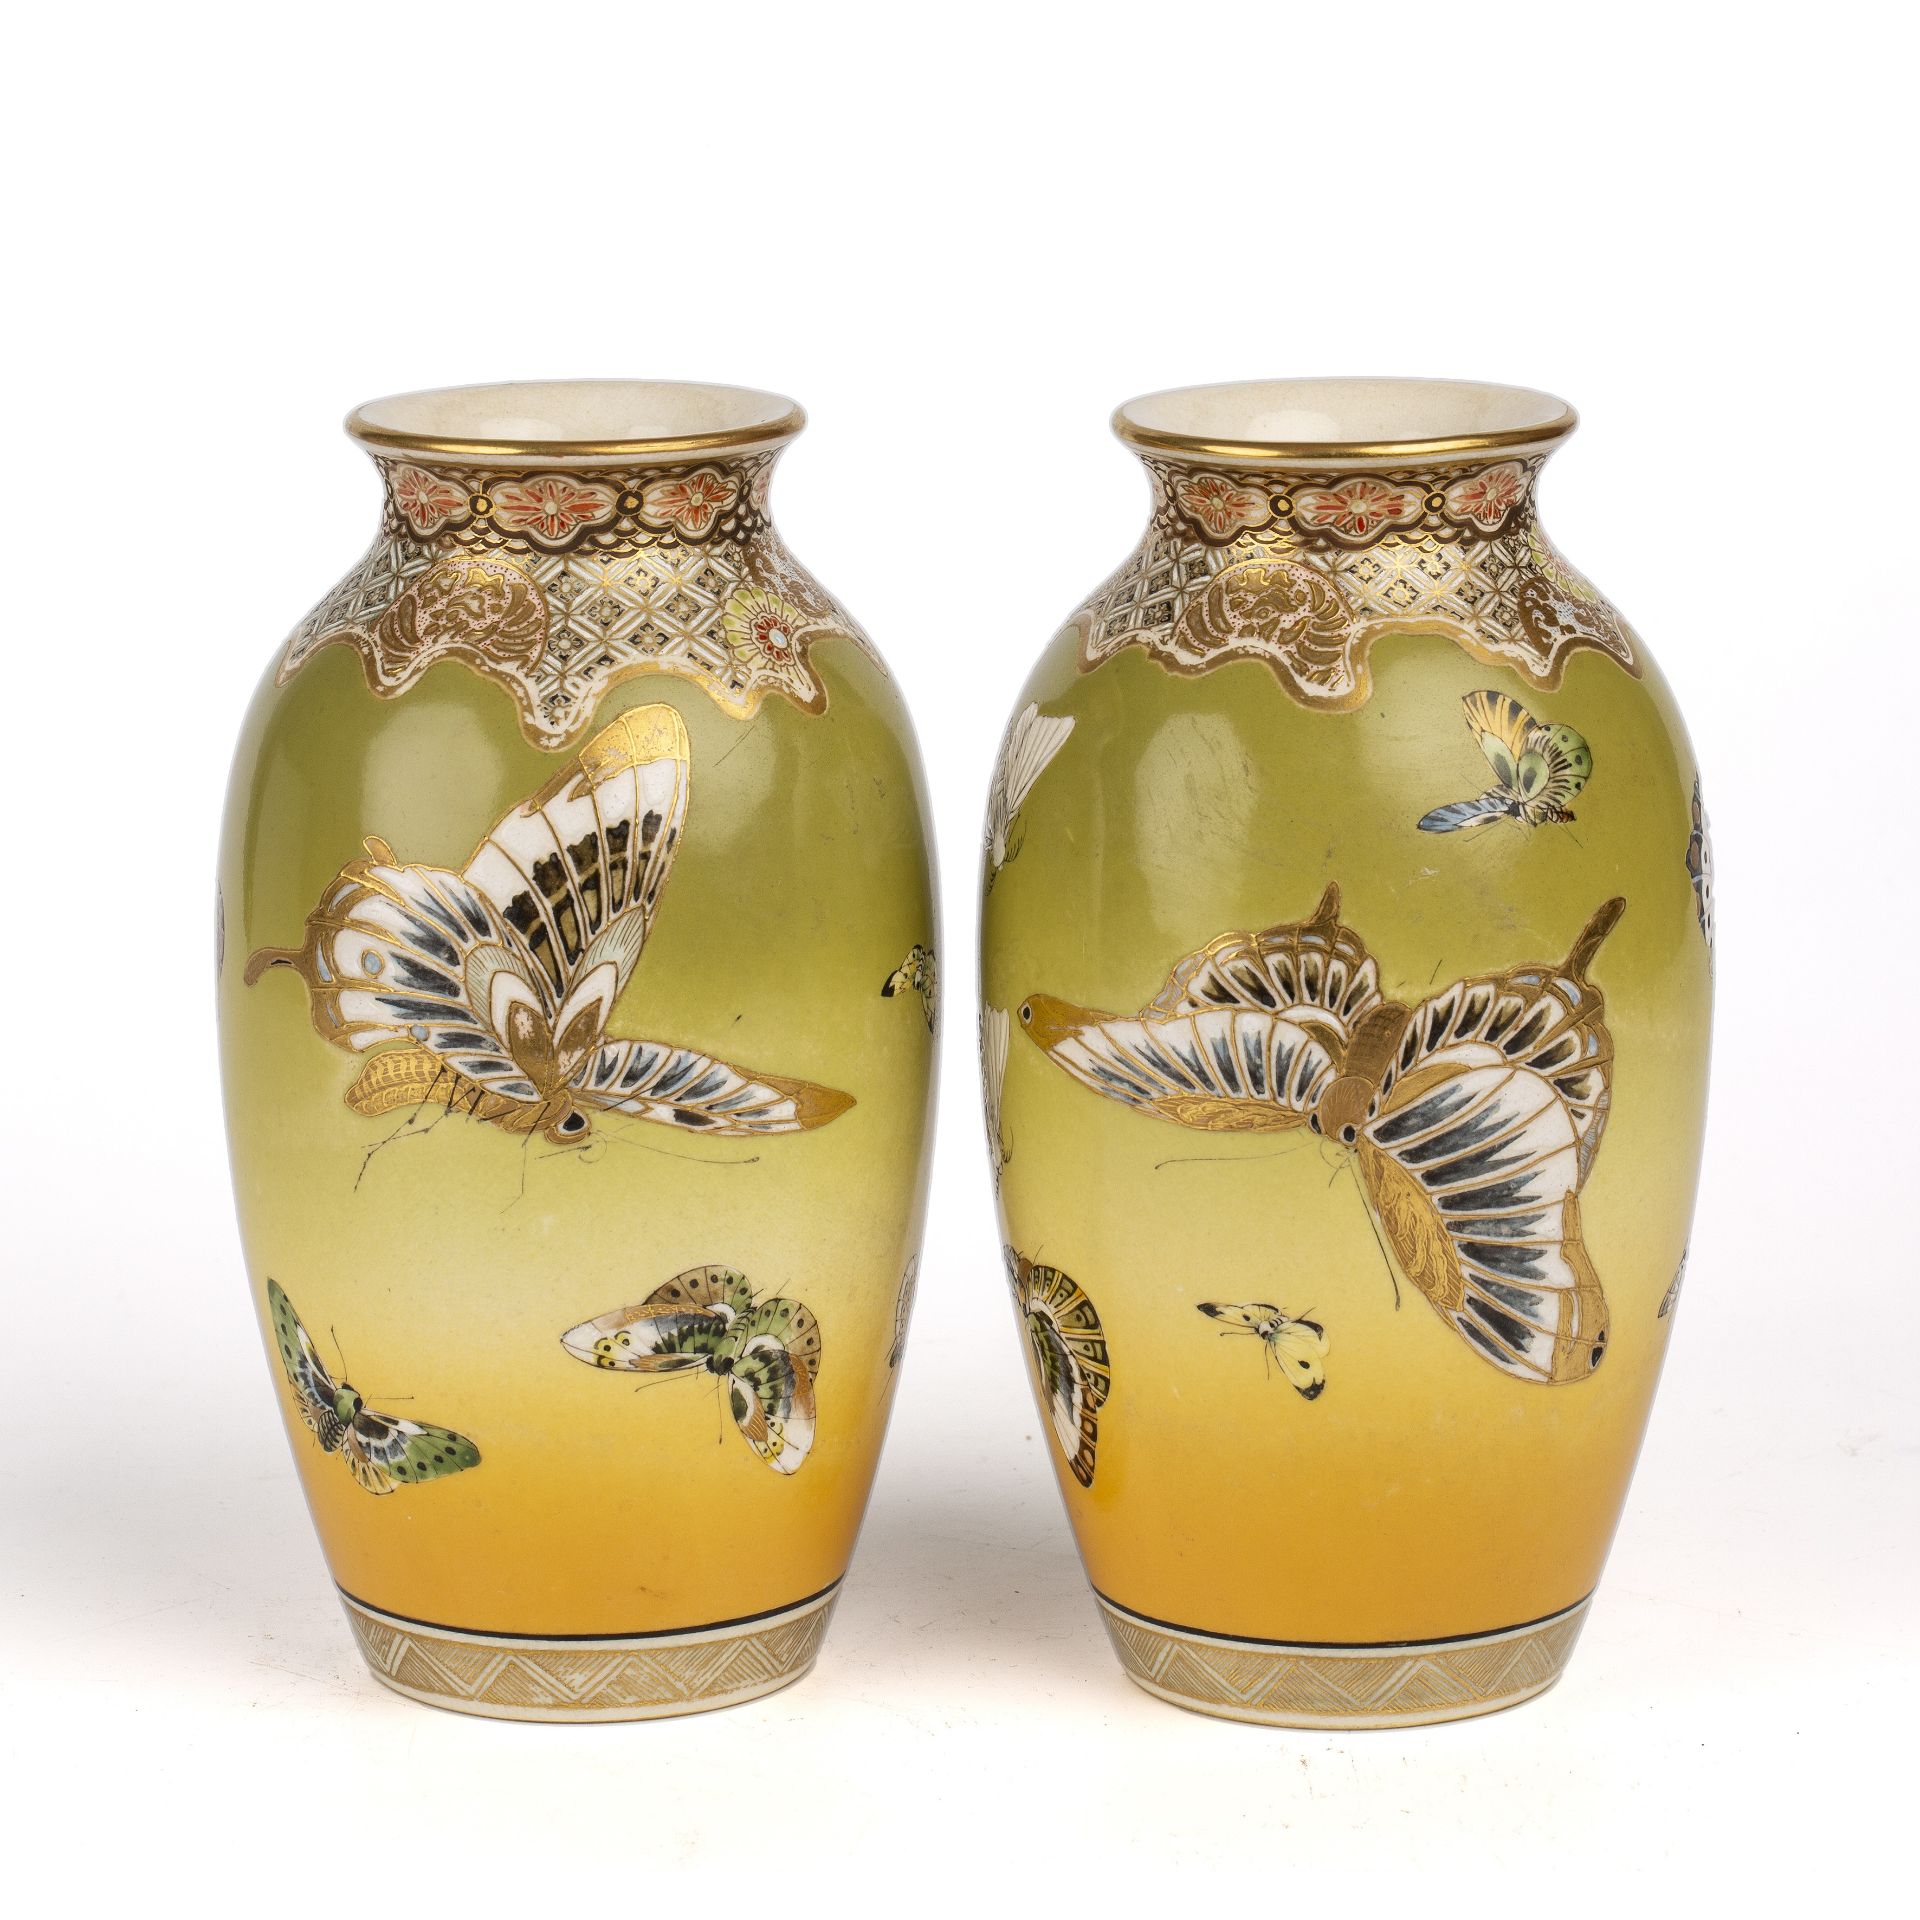 A pair of Japanese Meiji Satsuma porcelain vases decorated with butterflies and moths, with